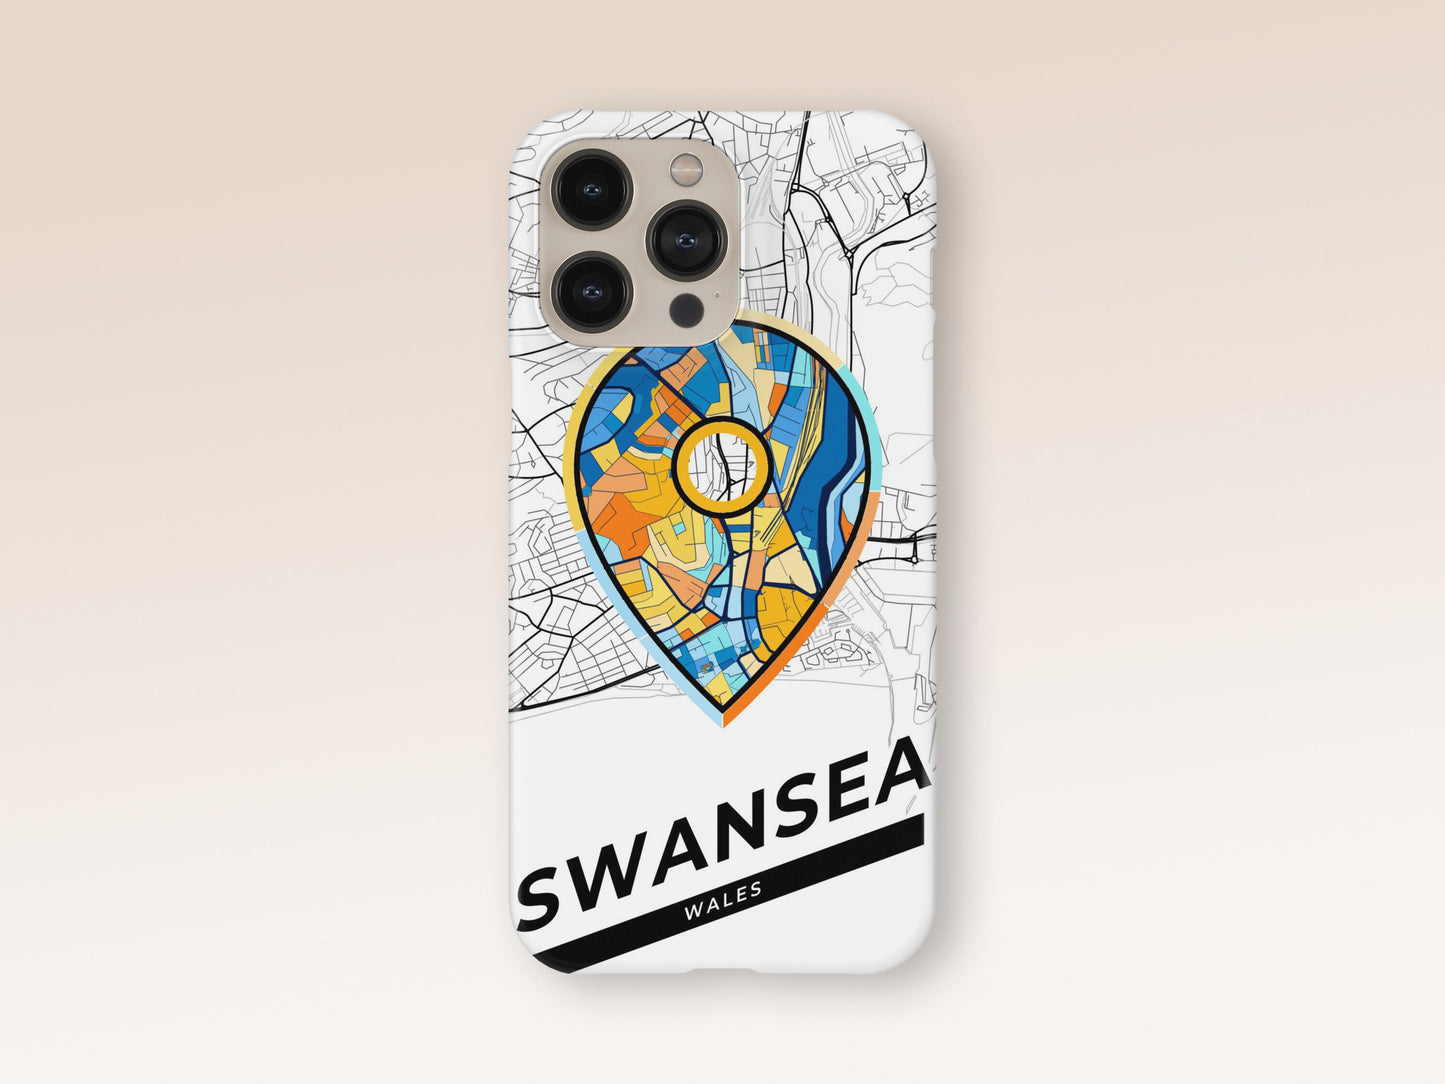 Swansea Wales slim phone case with colorful icon 1